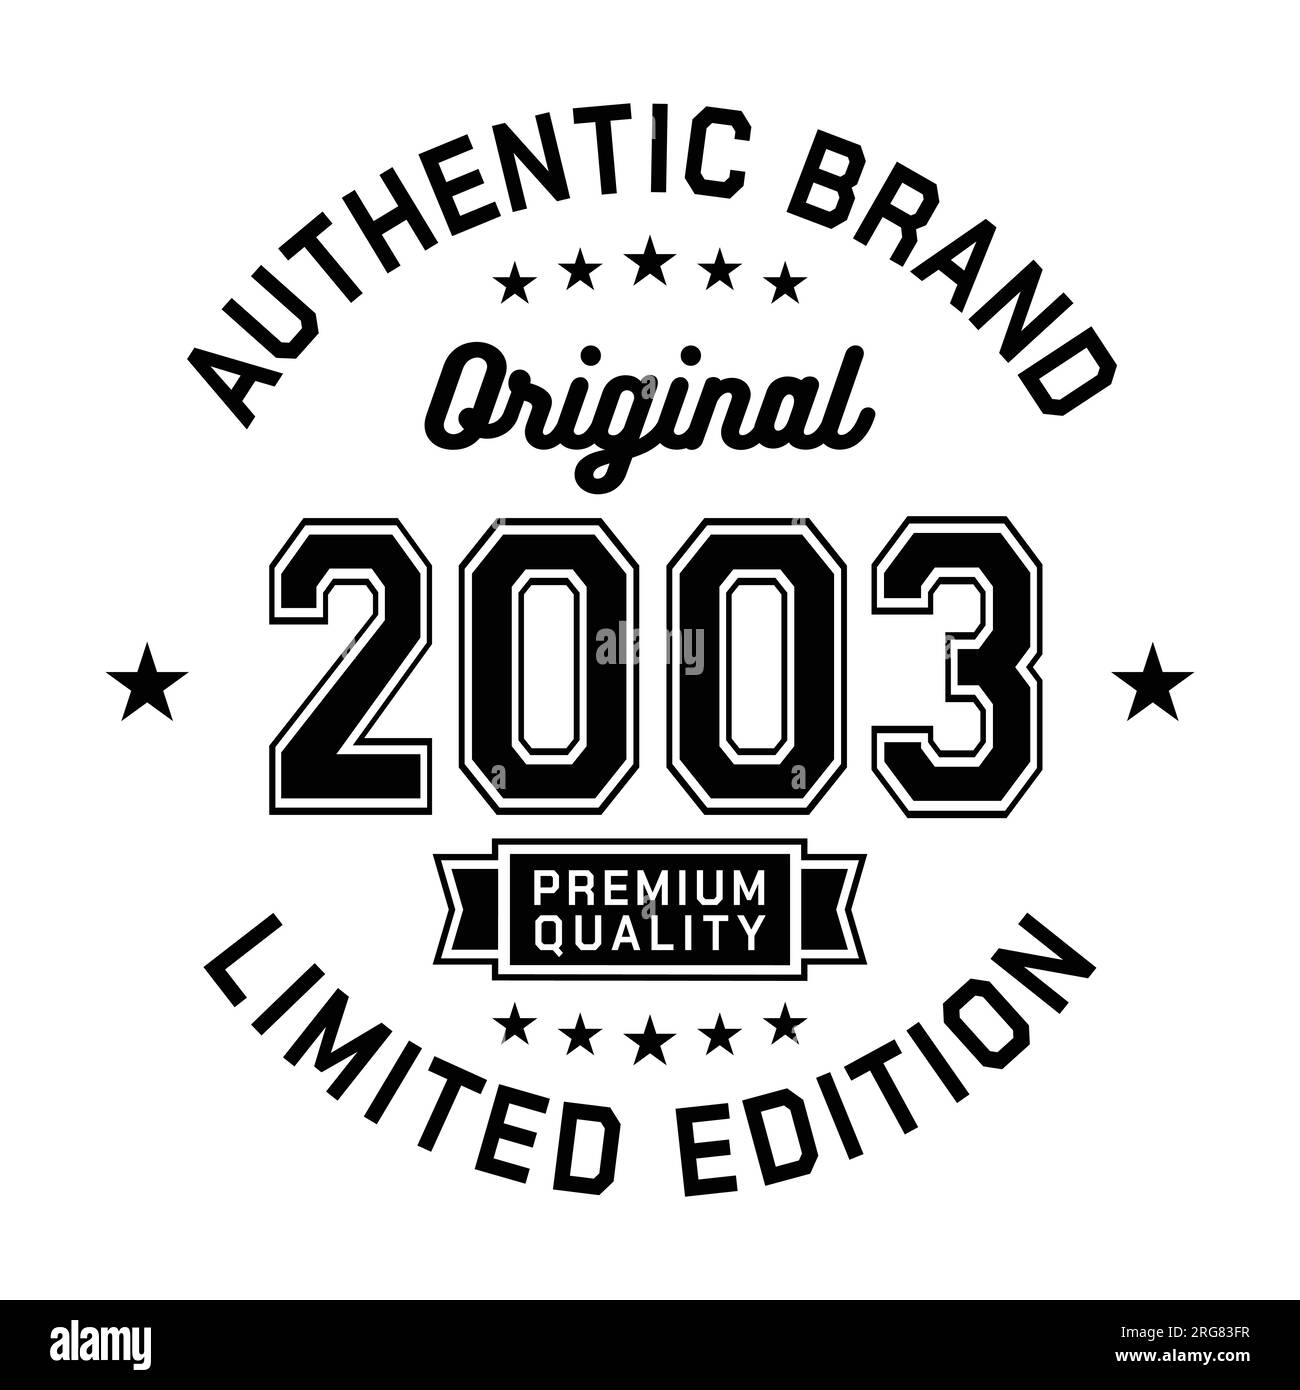 2003 Authentic brand. Apparel fashion design. Graphic design for t-shirt. Vector and illustration. Stock Vector